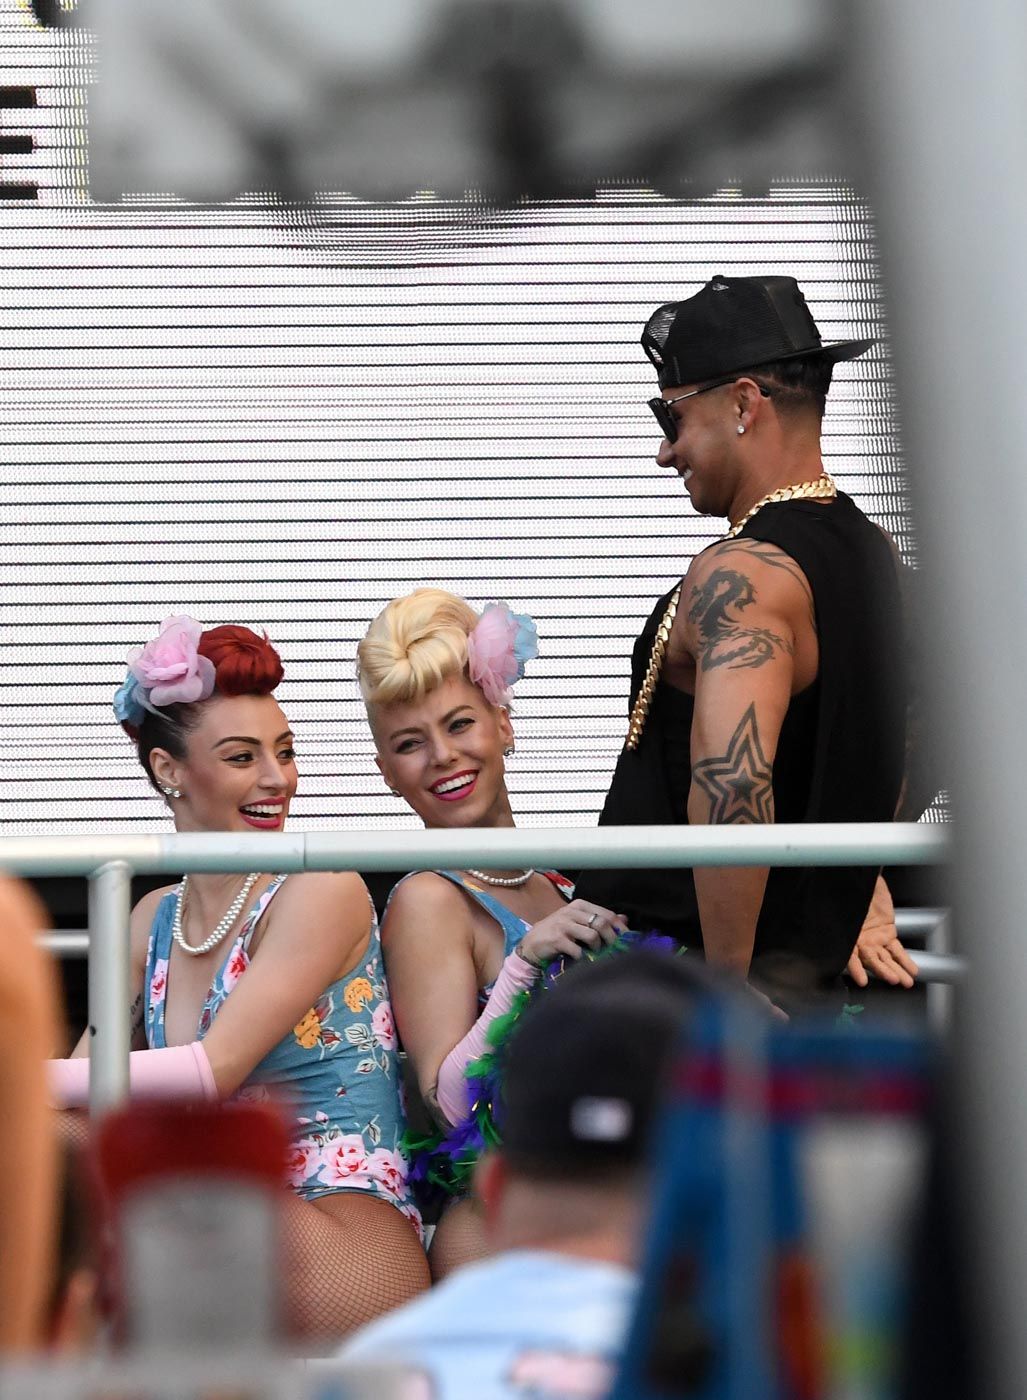 Pauly D Gets Lap Dance While Filming Jersey Shore Reboot